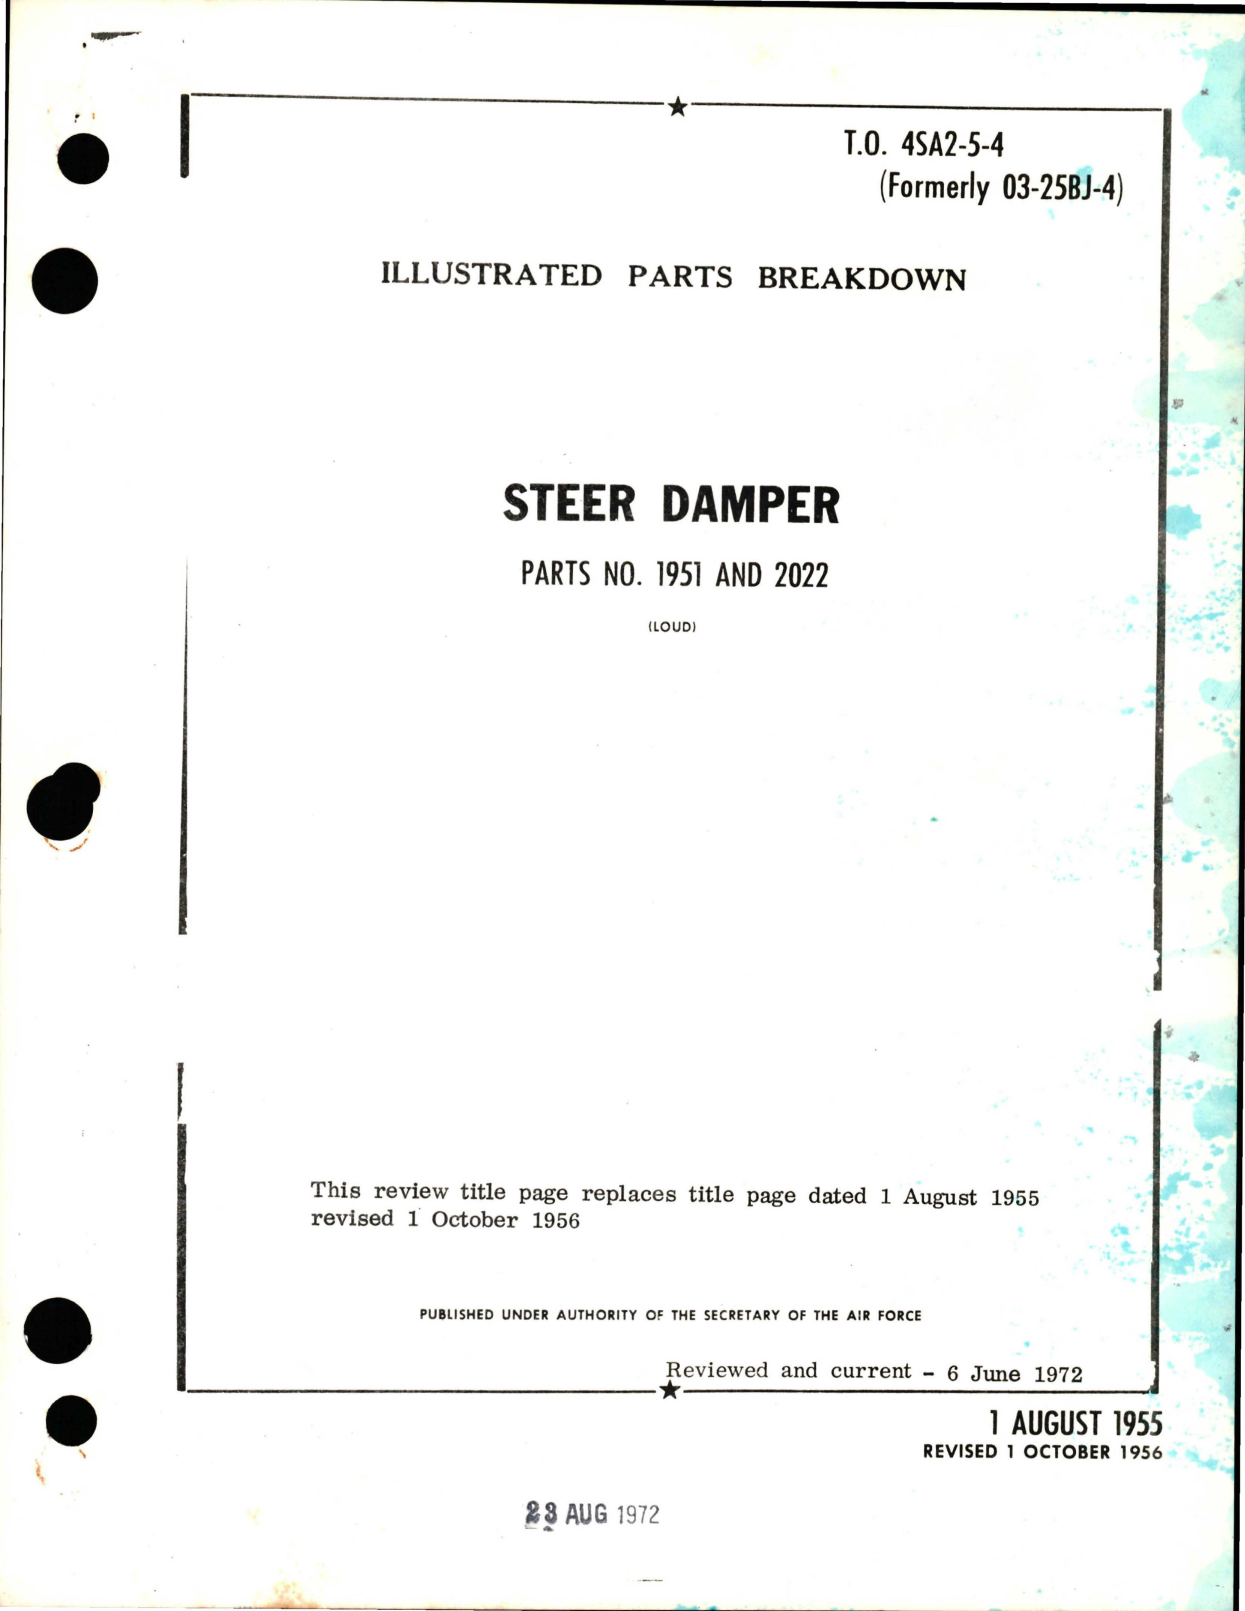 Sample page 1 from AirCorps Library document: Illustrated Parts Breakdown for Steer Damper - Parts 1951 and 2022